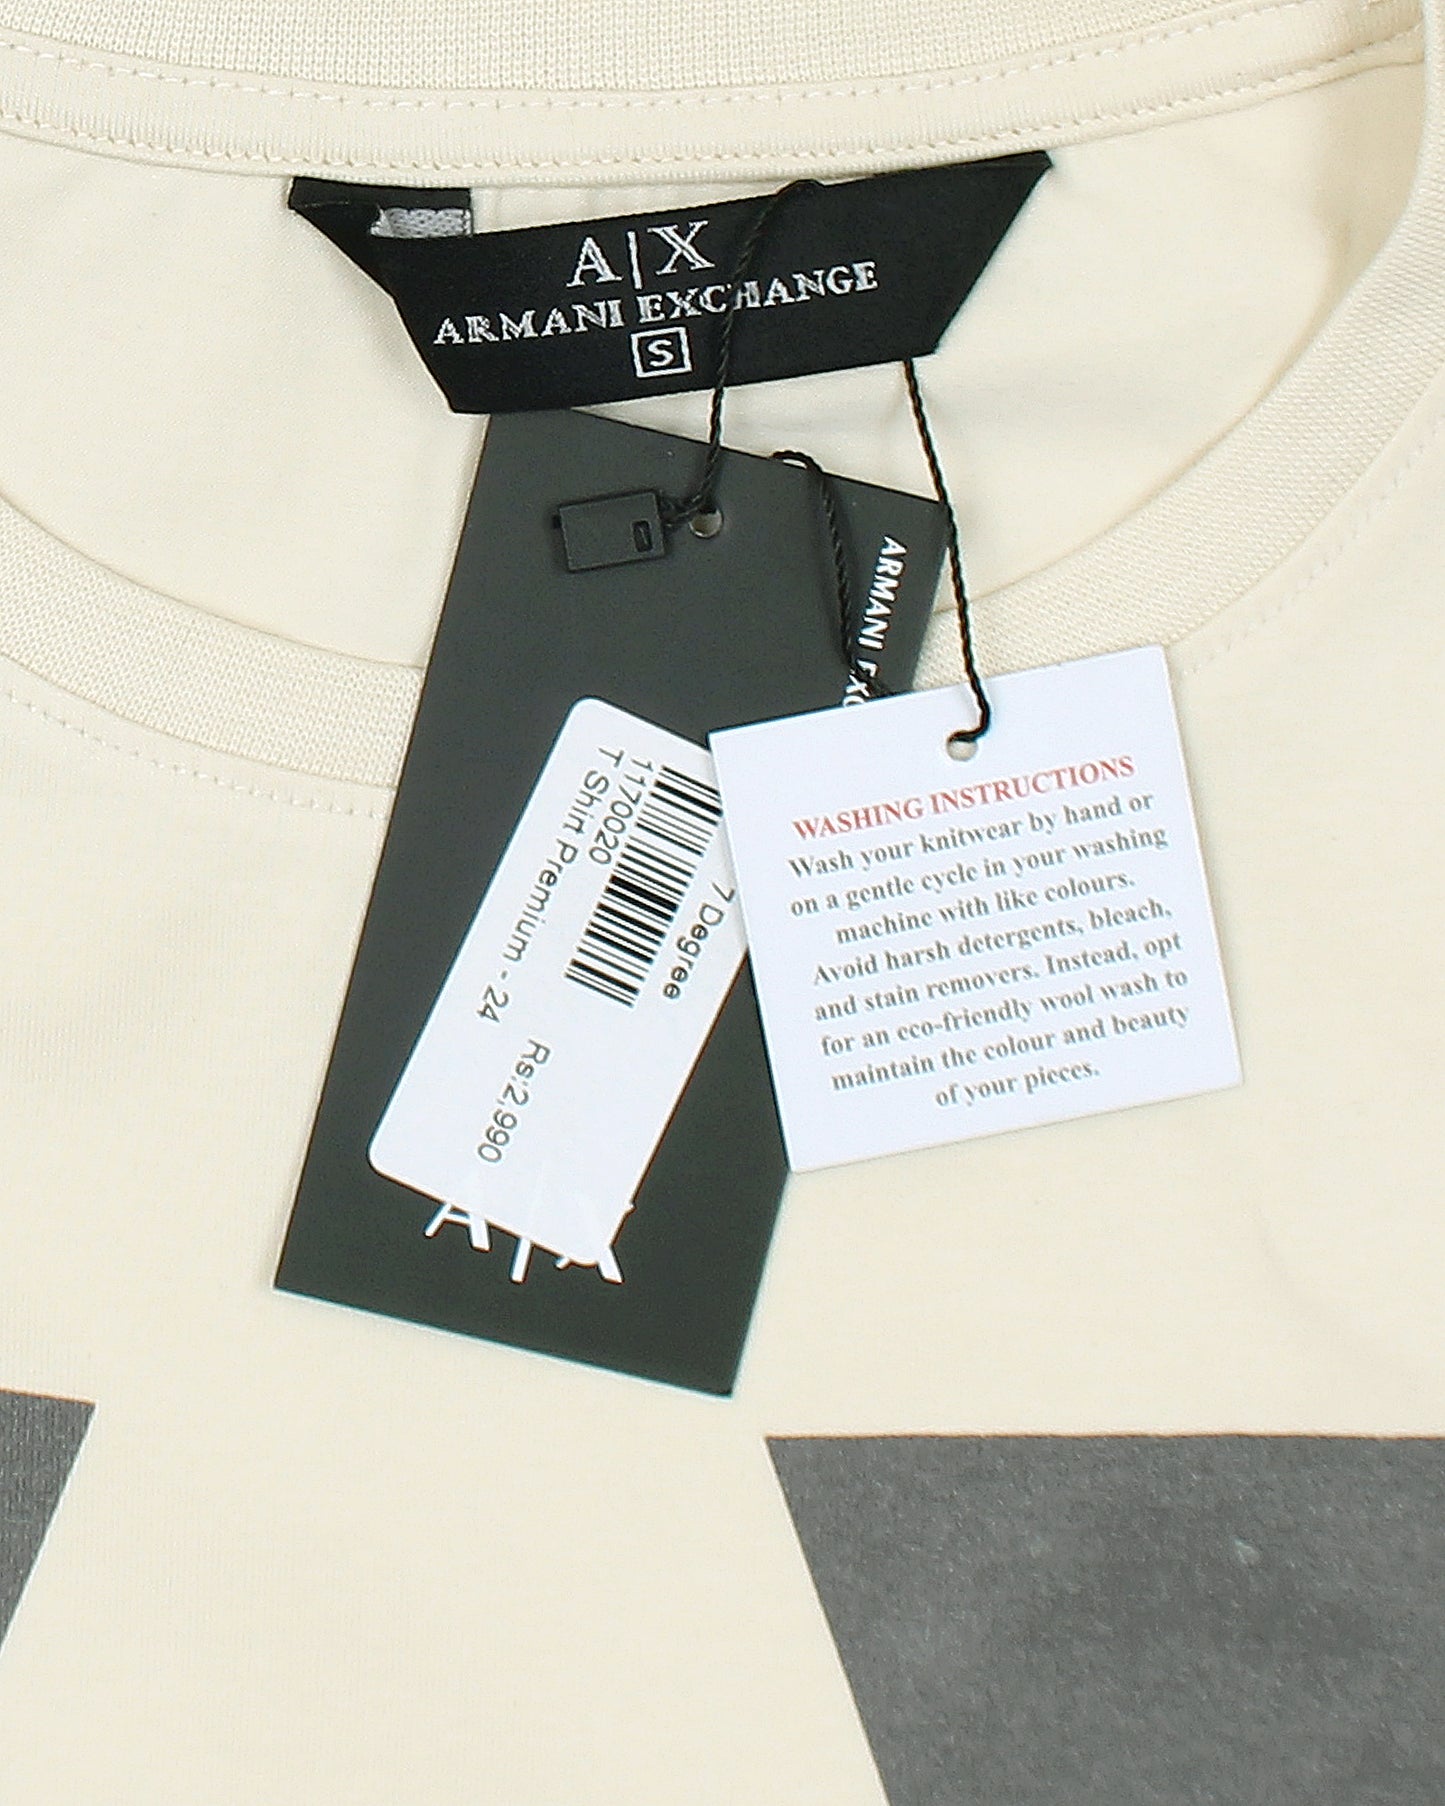 Exclusive A-X Sign Tee Shirt - off White